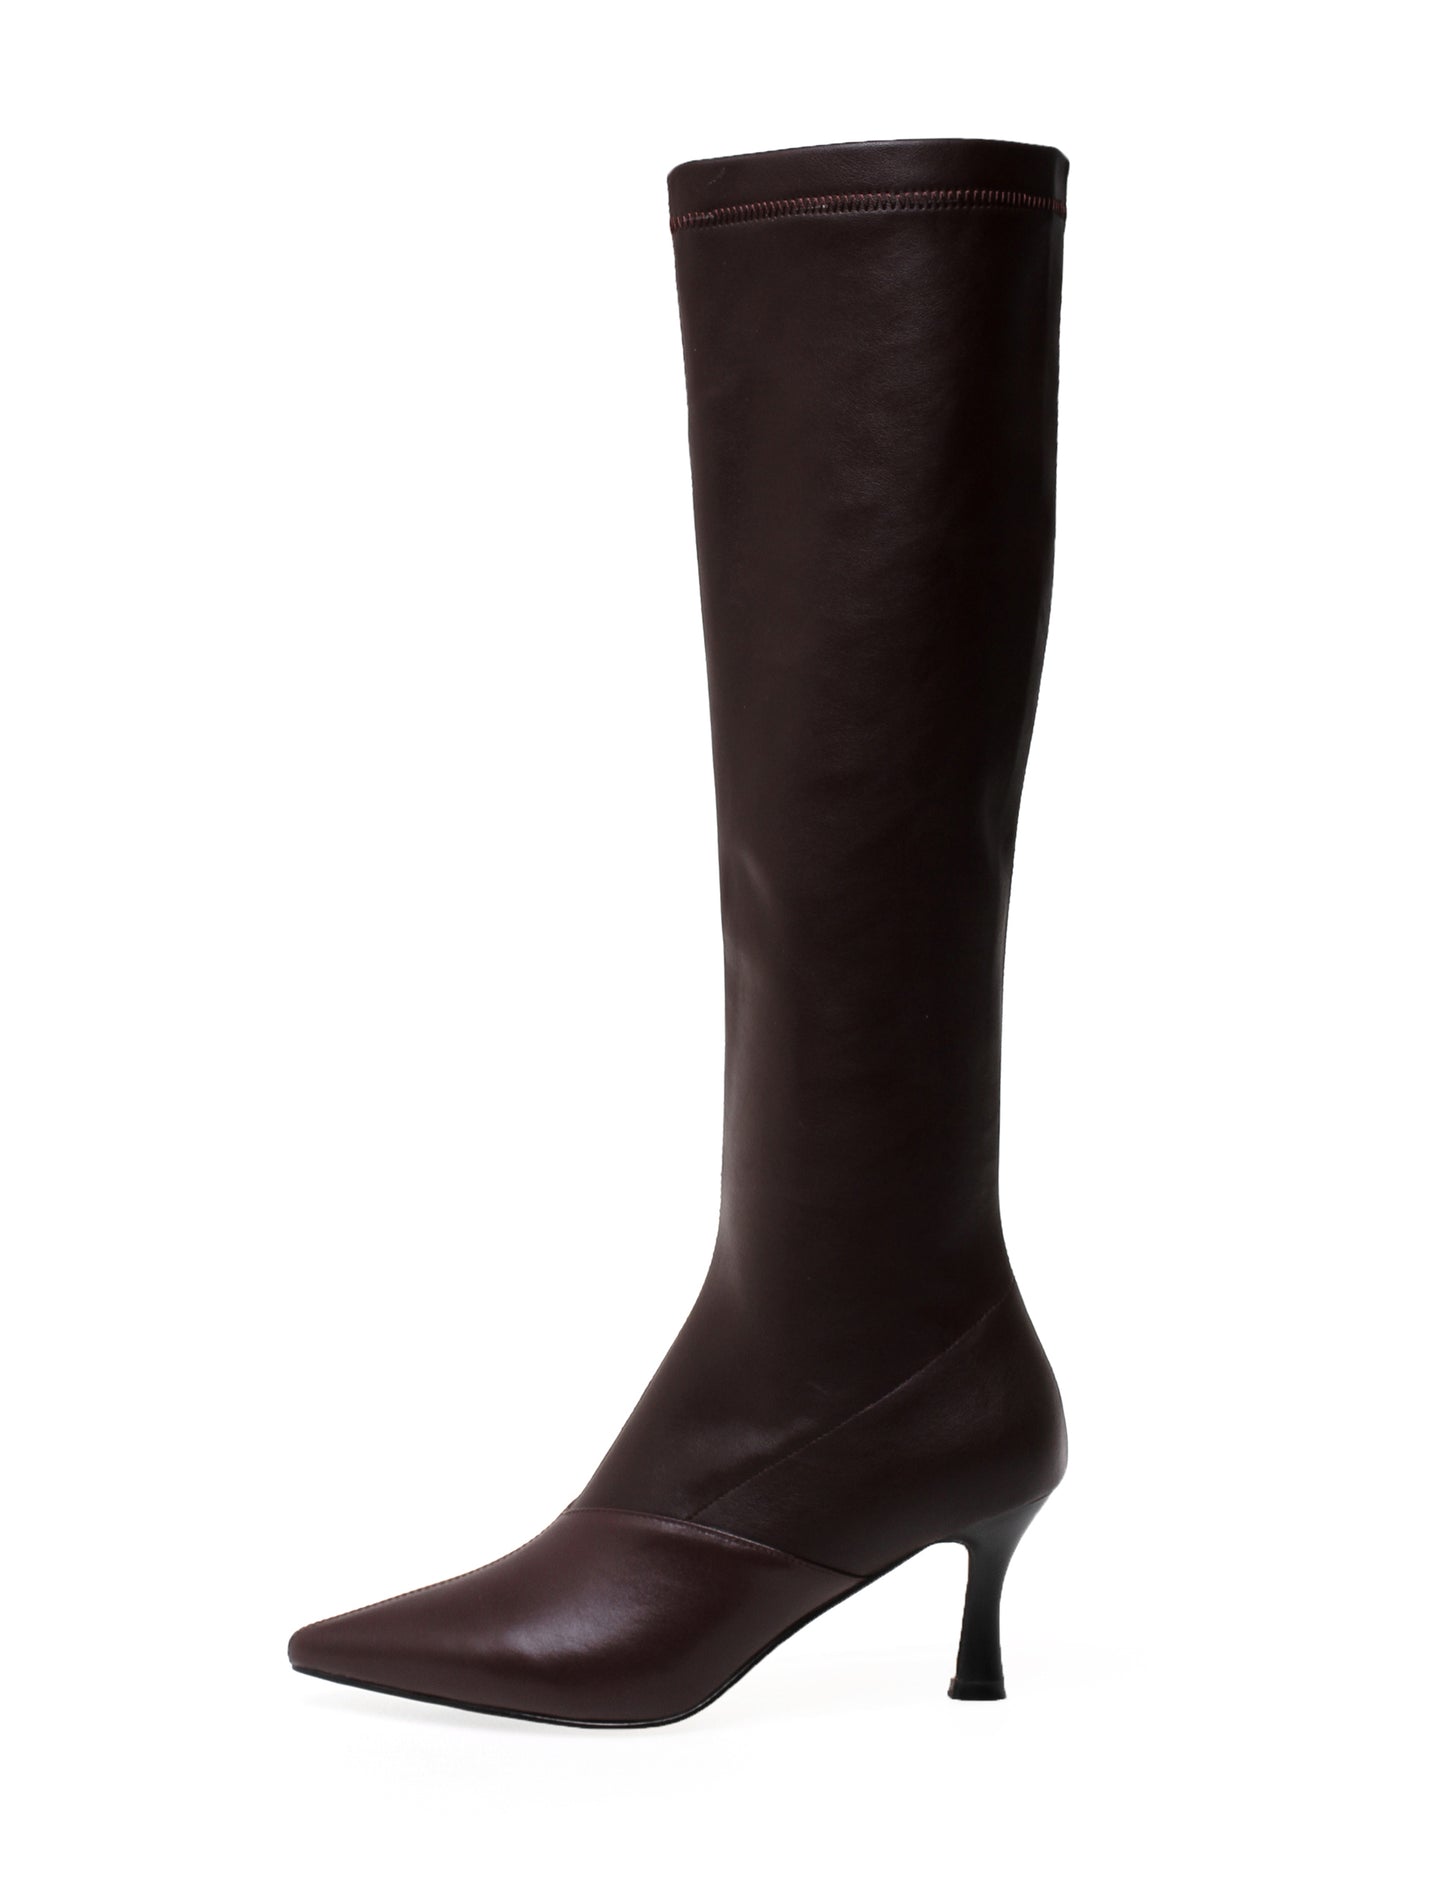 TinaCus Women's Handmade Genuine Leather with Elastic Fabric Pointed Toe Side Zip Mid Heel Stylish Knee High Boots